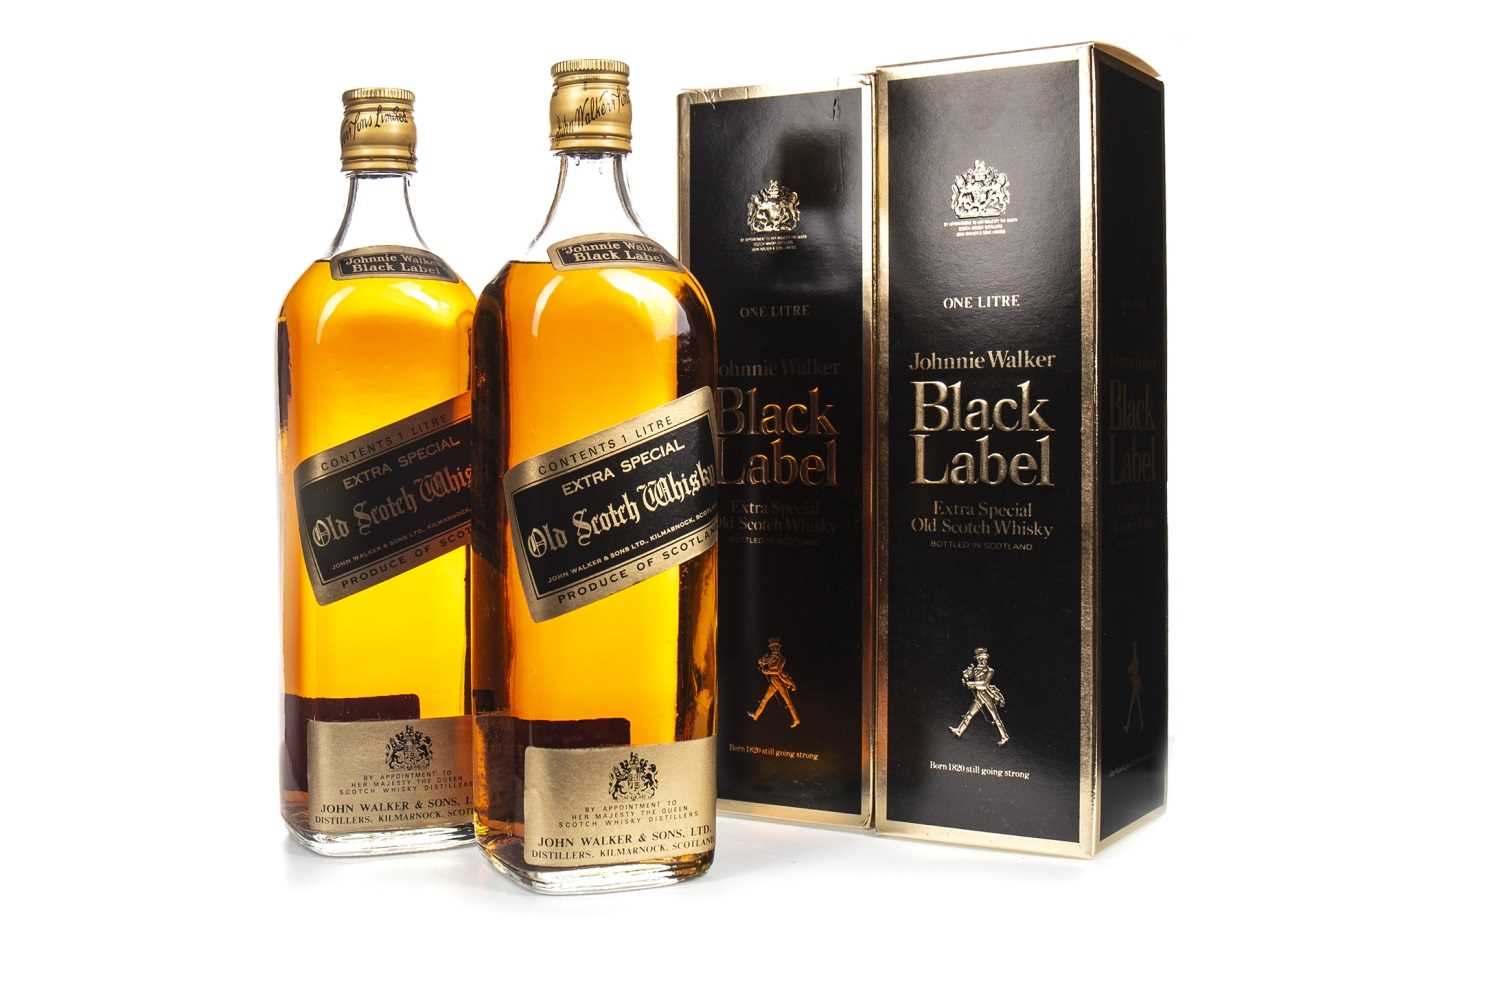 Lot 425 - TWO LITRES OF JOHNNIE WALKER BLACK LABEL AGED 12 YEARS